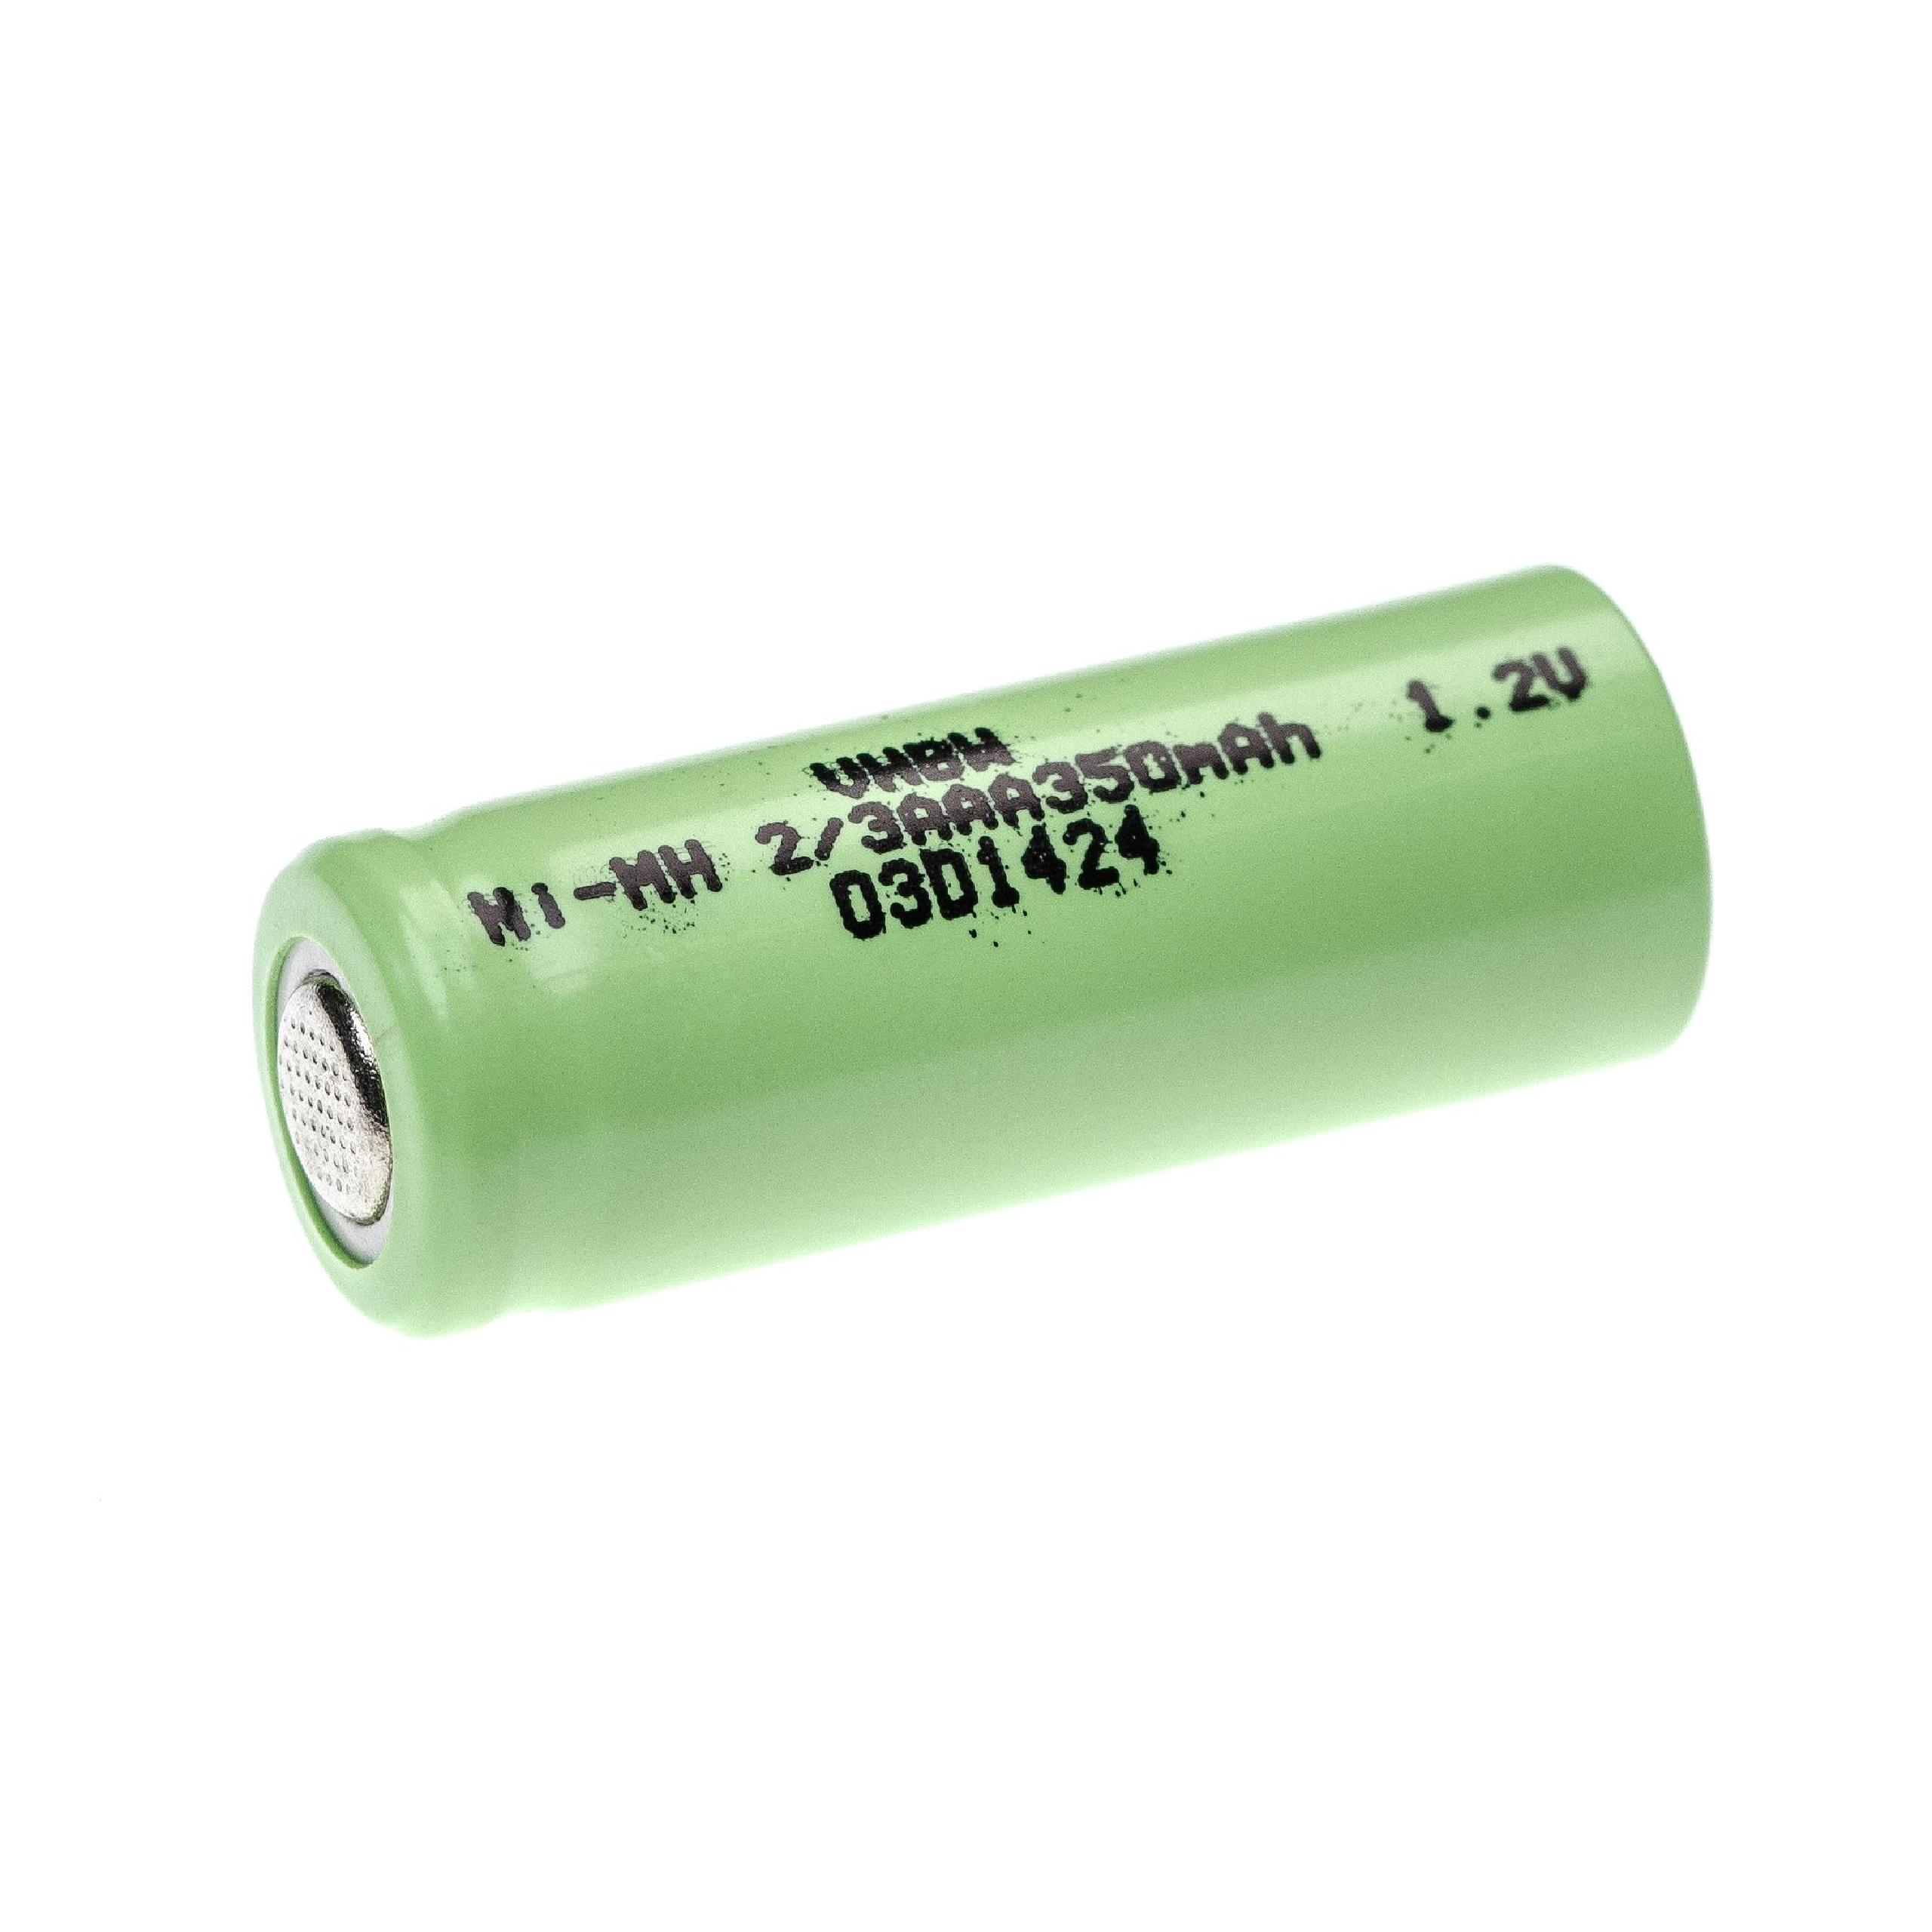 Raw Battery Cell H4002 for Rechargeable Batteries - 350mAh 1.2V NiMH